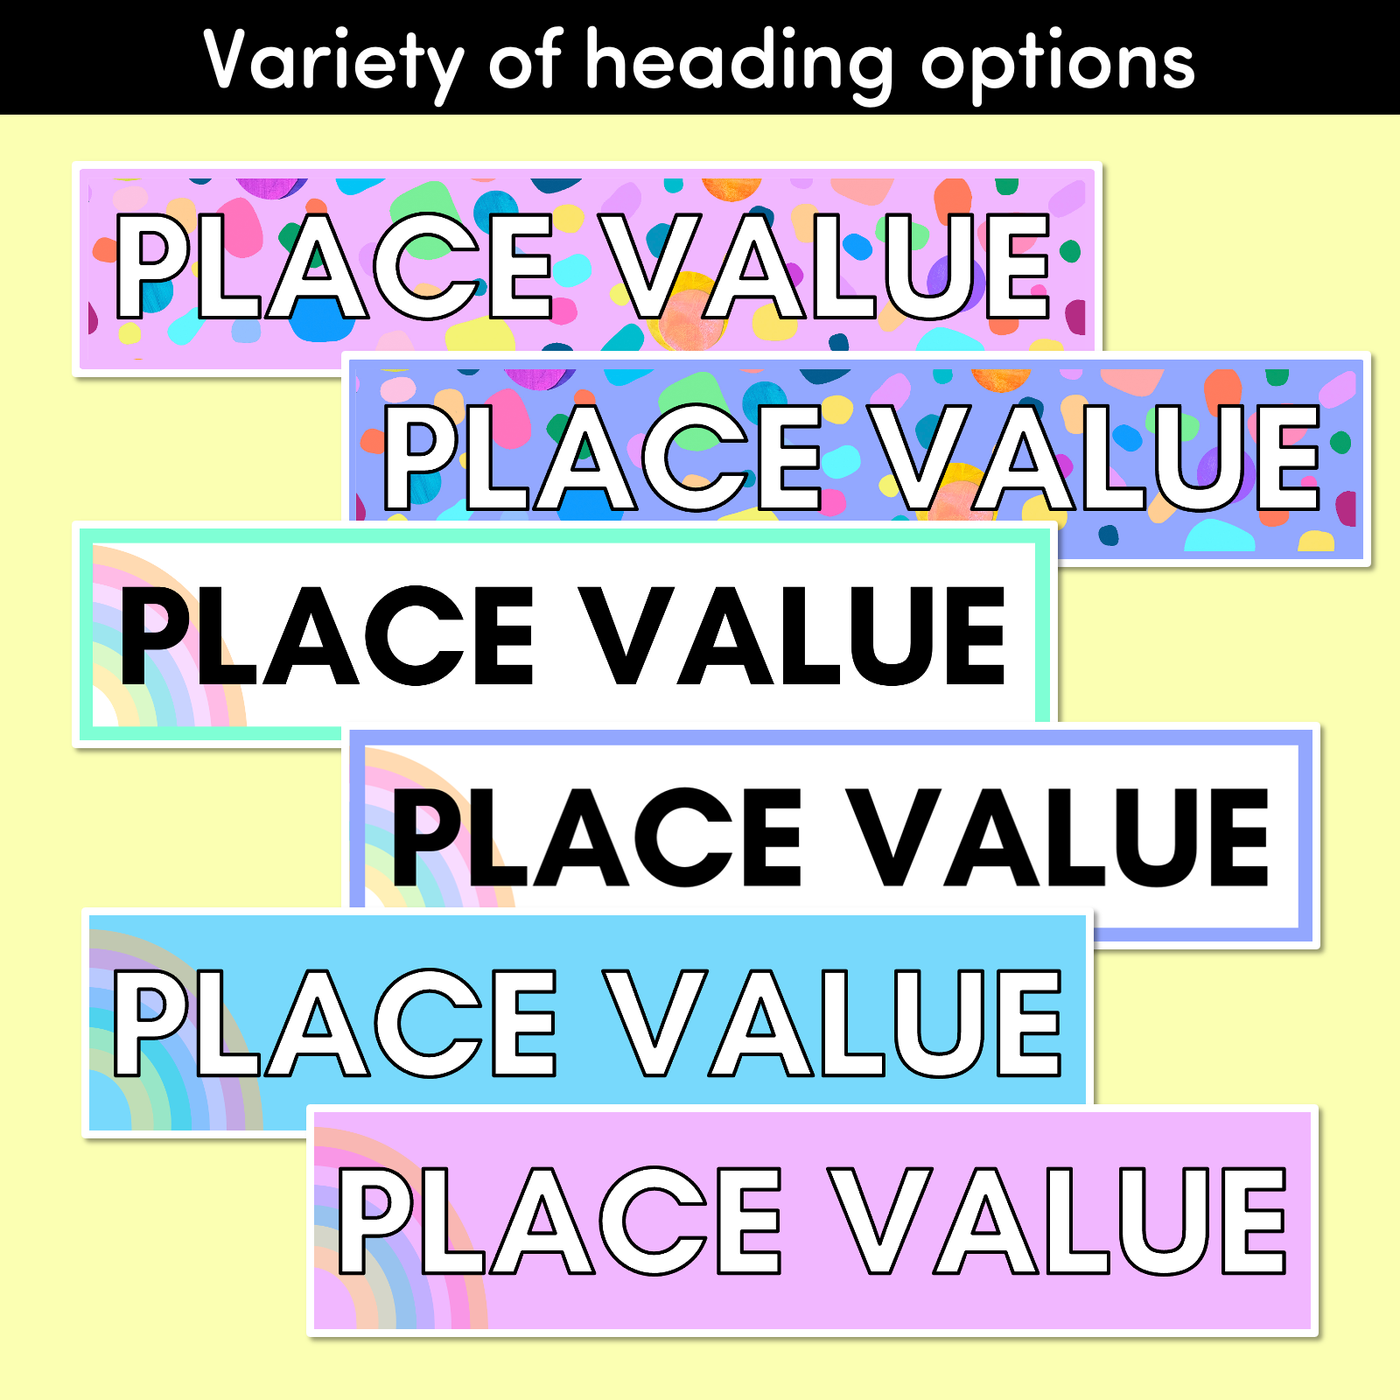 PLACE VALUE POSTERS - The Kasey Rainbow Collection - Rainbow Block Colours